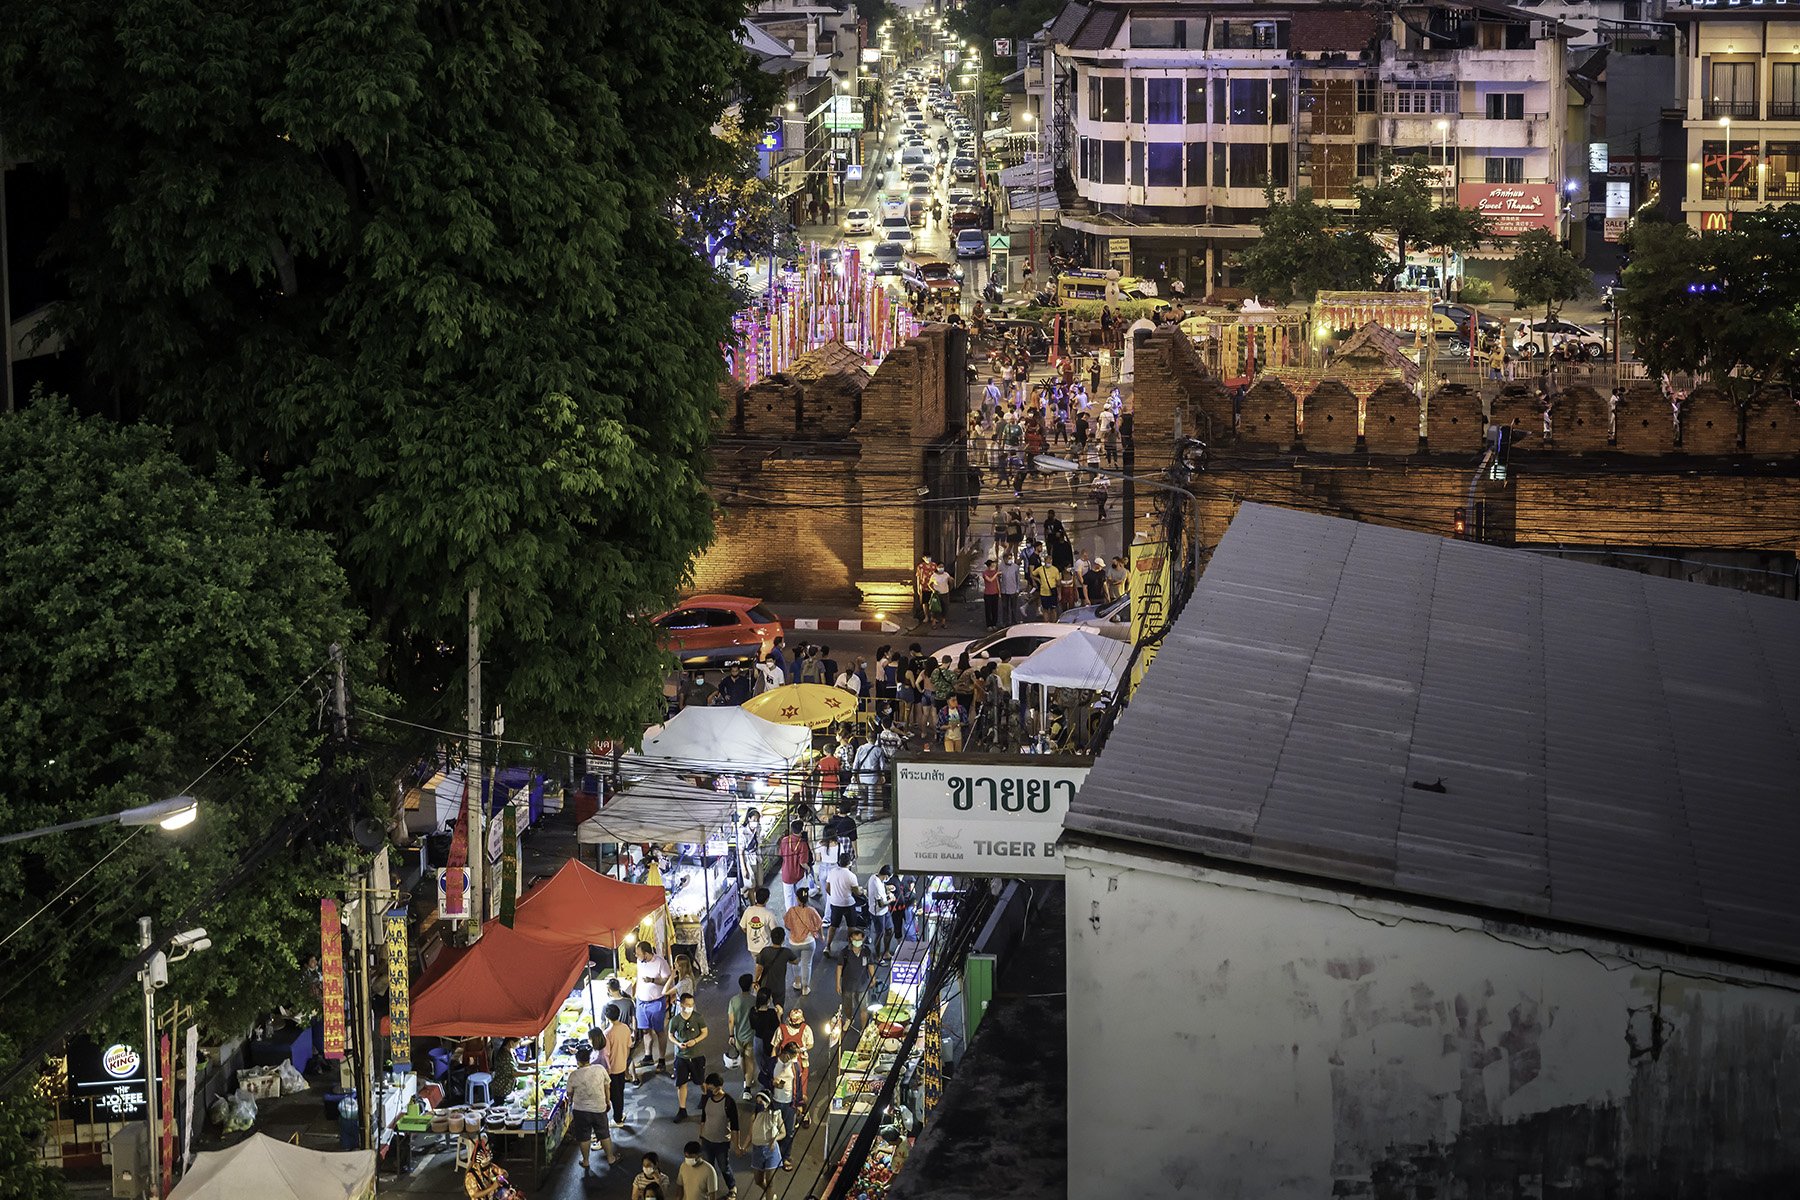 Busy night market at Tha Phae Gate, which marks the east entrance to the old walled city of Chiang Mai, Thailand.